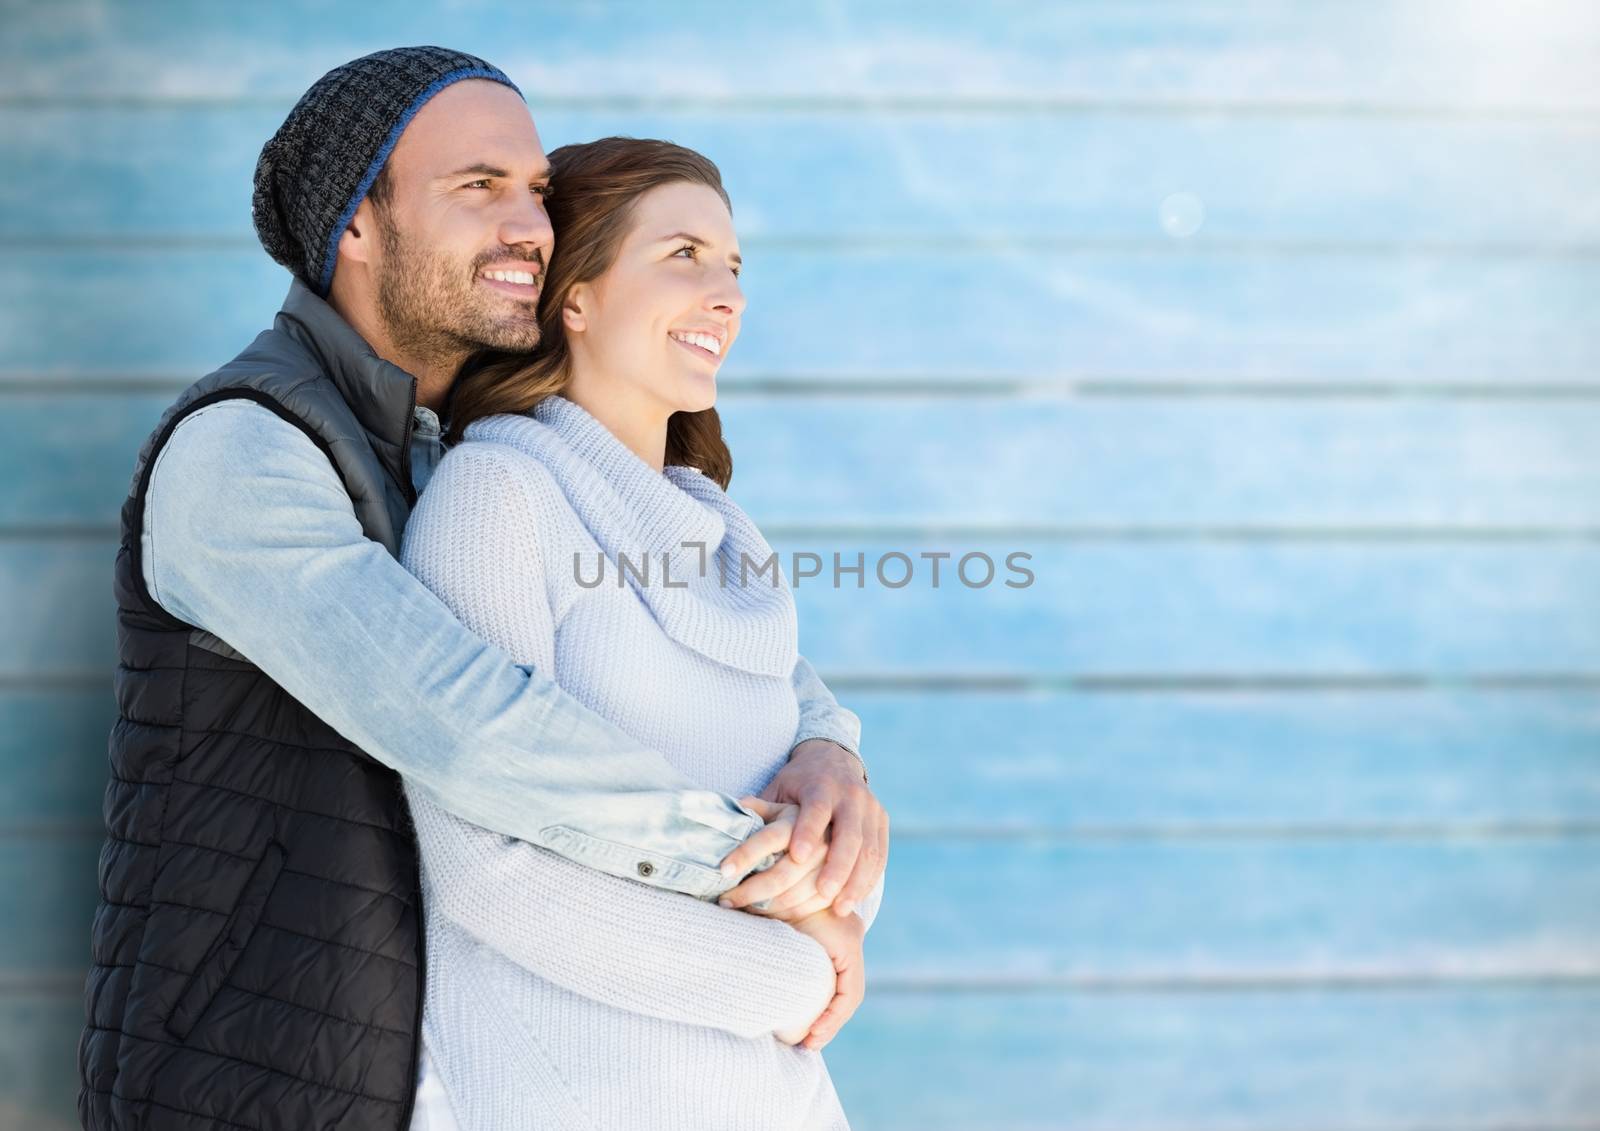 Romantic couple embracing each other against blue wooden background